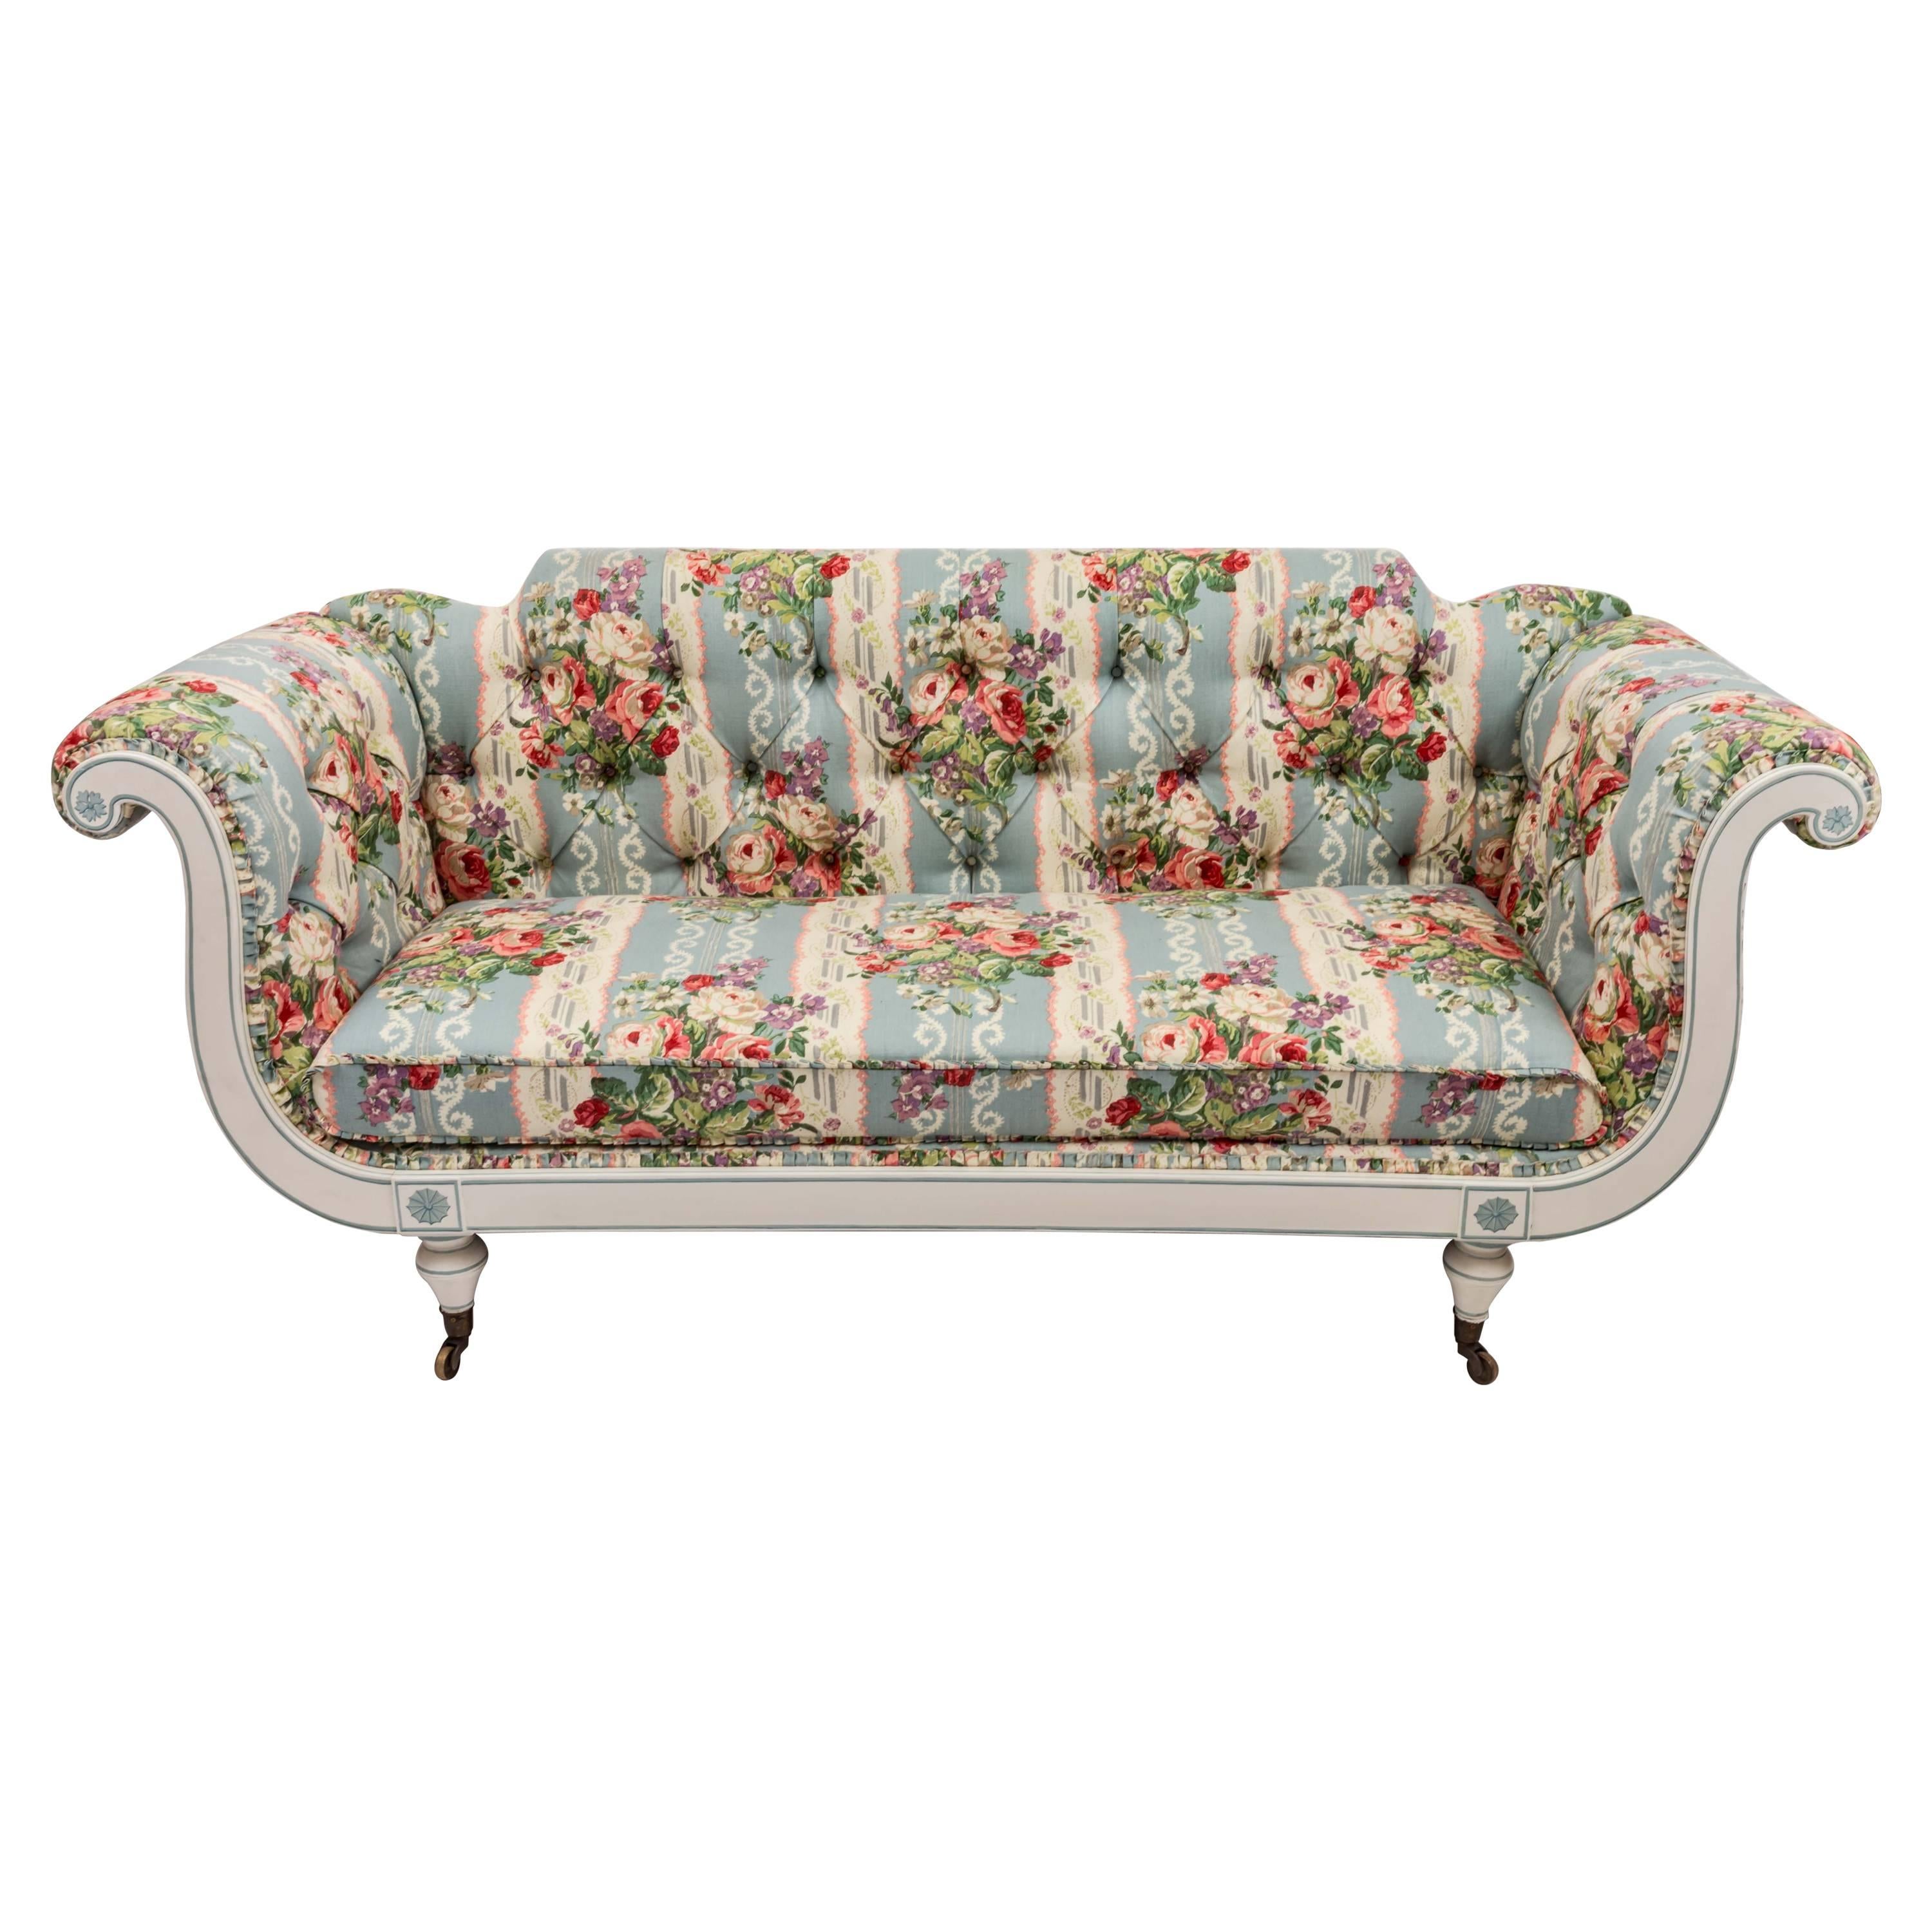 19th Century English Regency Settee in Floral Linen Print Fabric